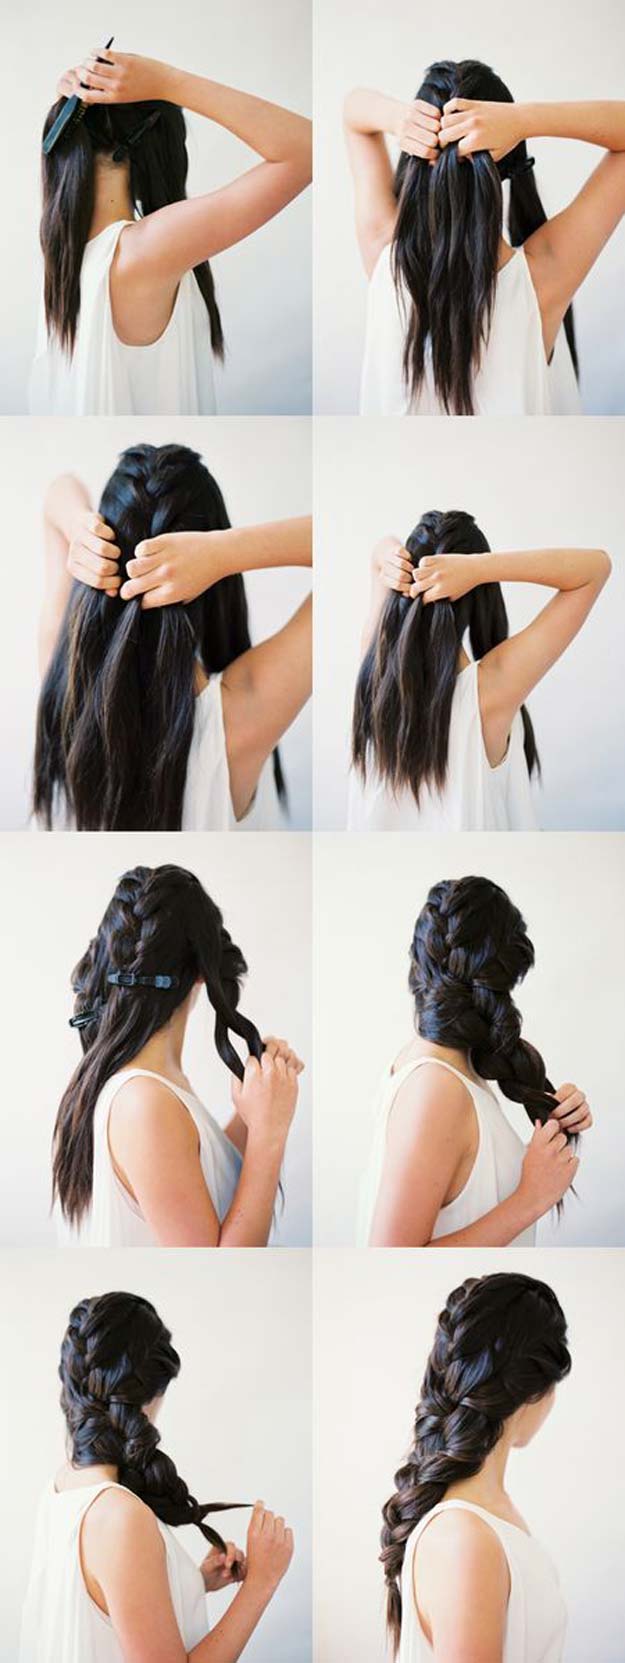 41 DIY Cool Easy Hairstyles That Real People Can Actually Do At